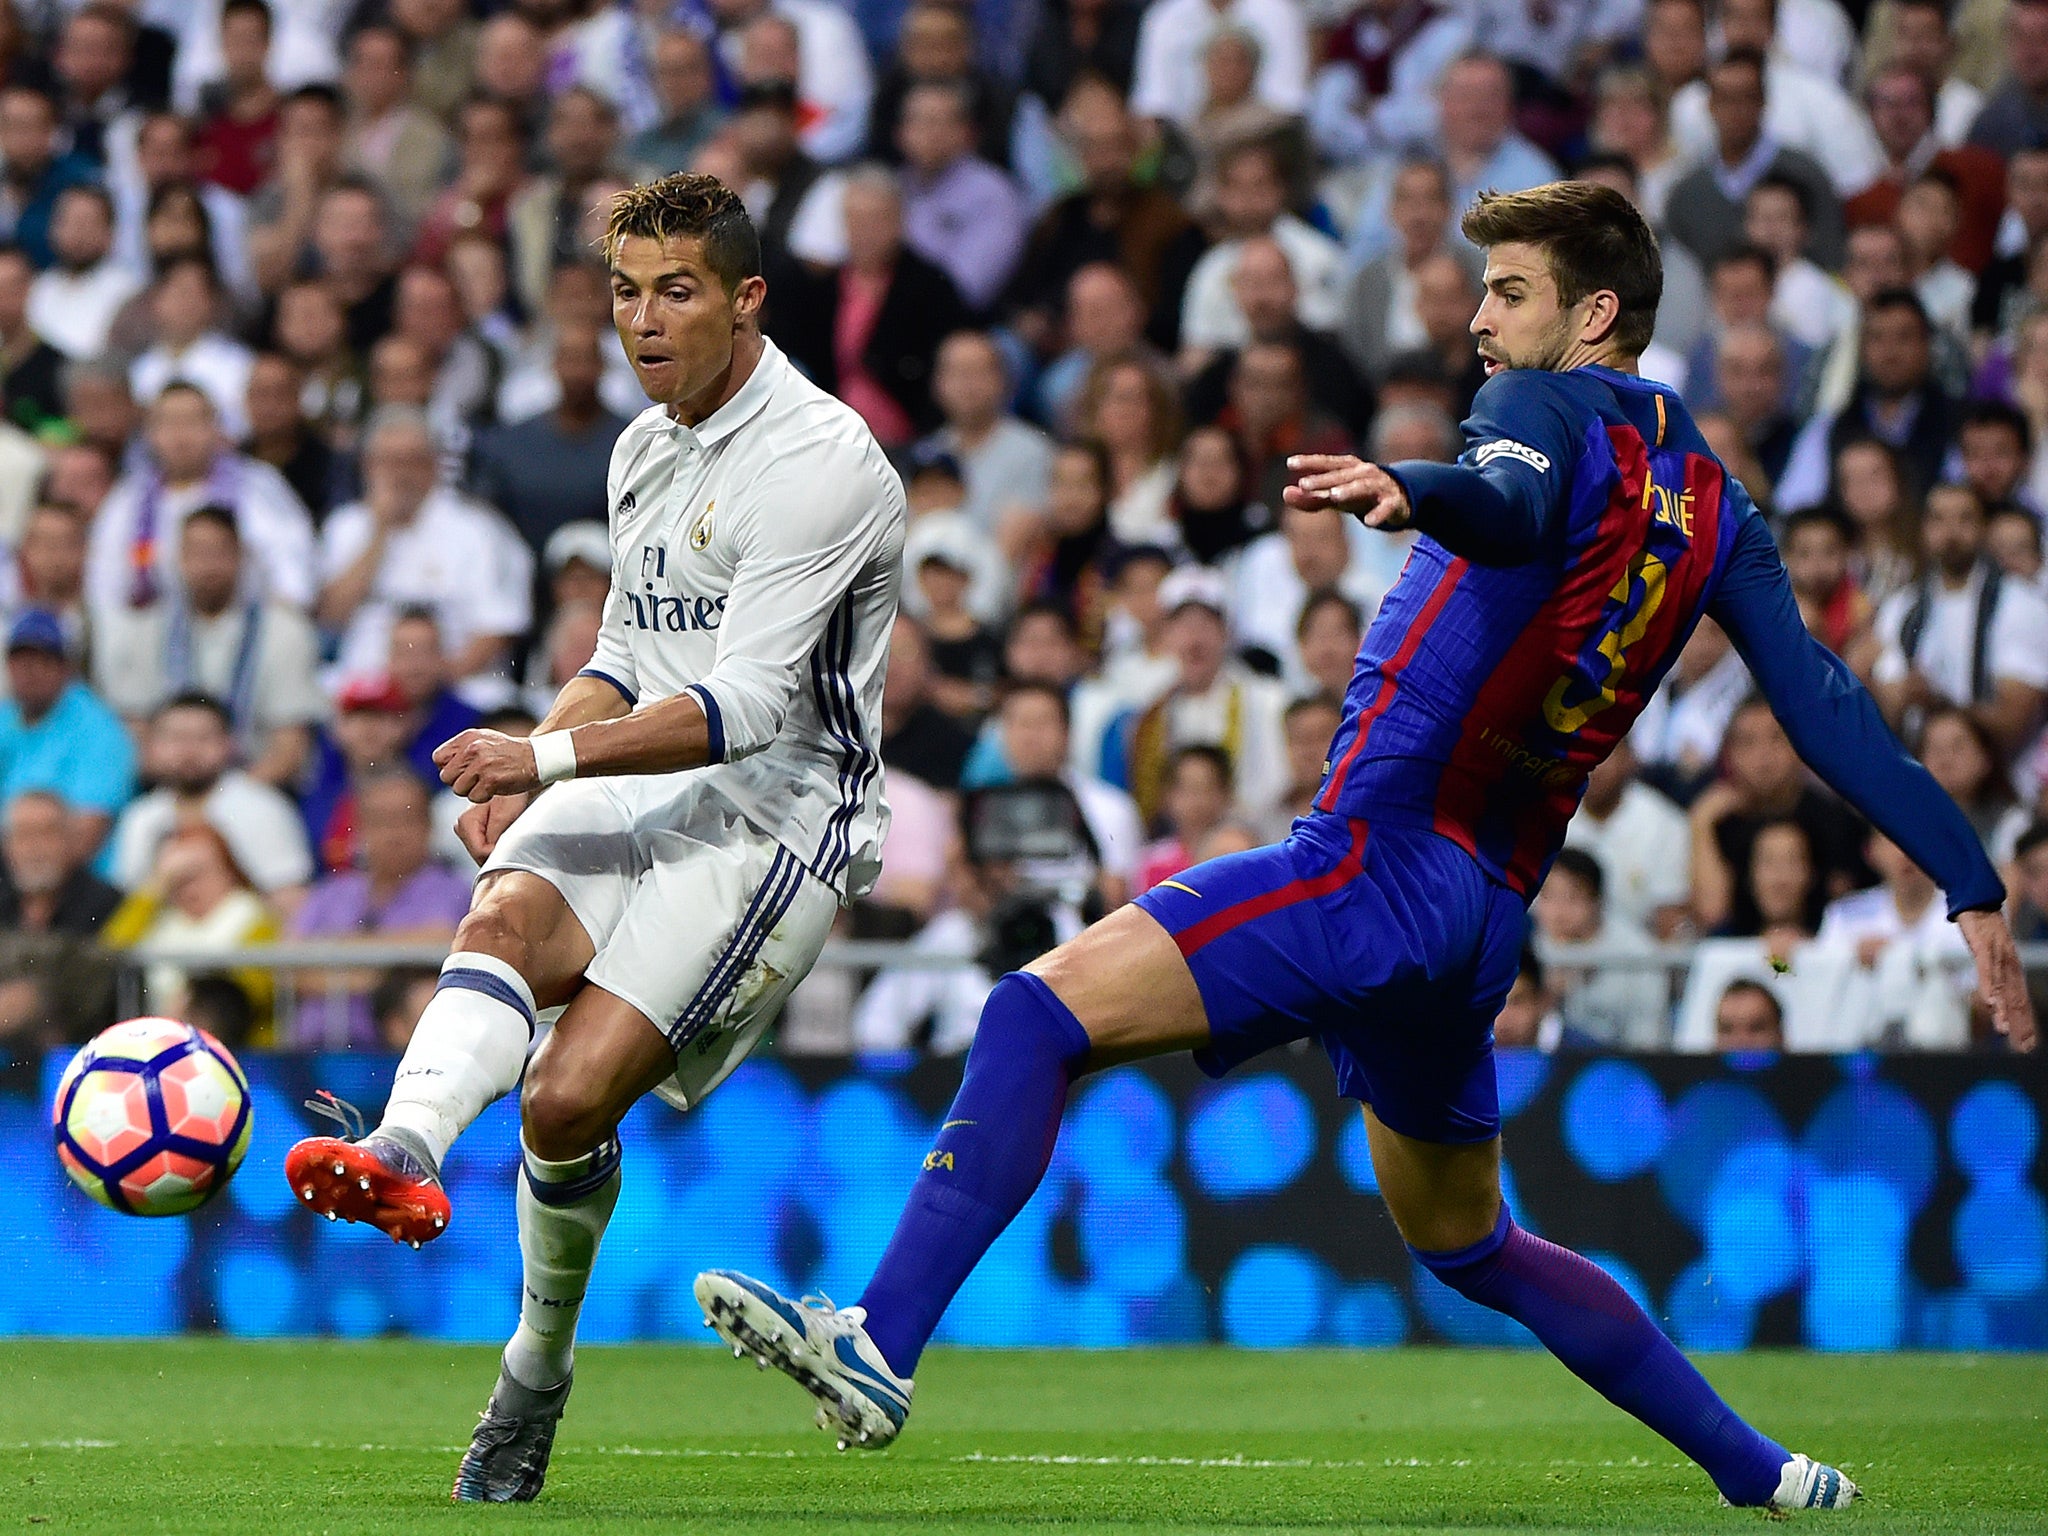 Cristiano Ronaldo is hoping to win his second La Liga title with Real Madrid